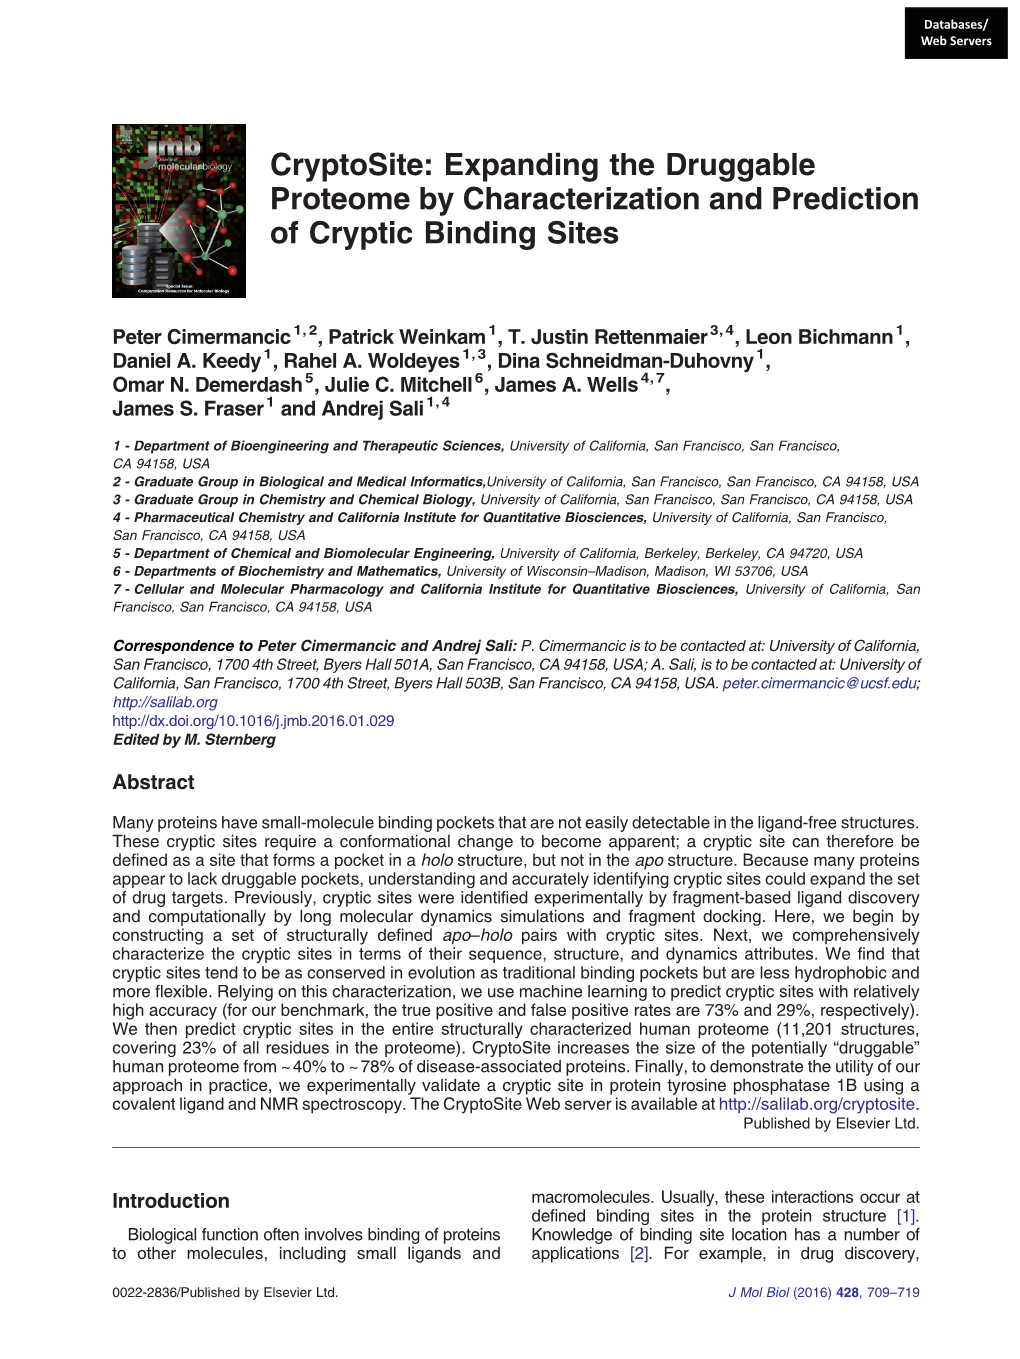 Expanding the Druggable Proteome by Characterization and Prediction of Cryptic Binding Sites